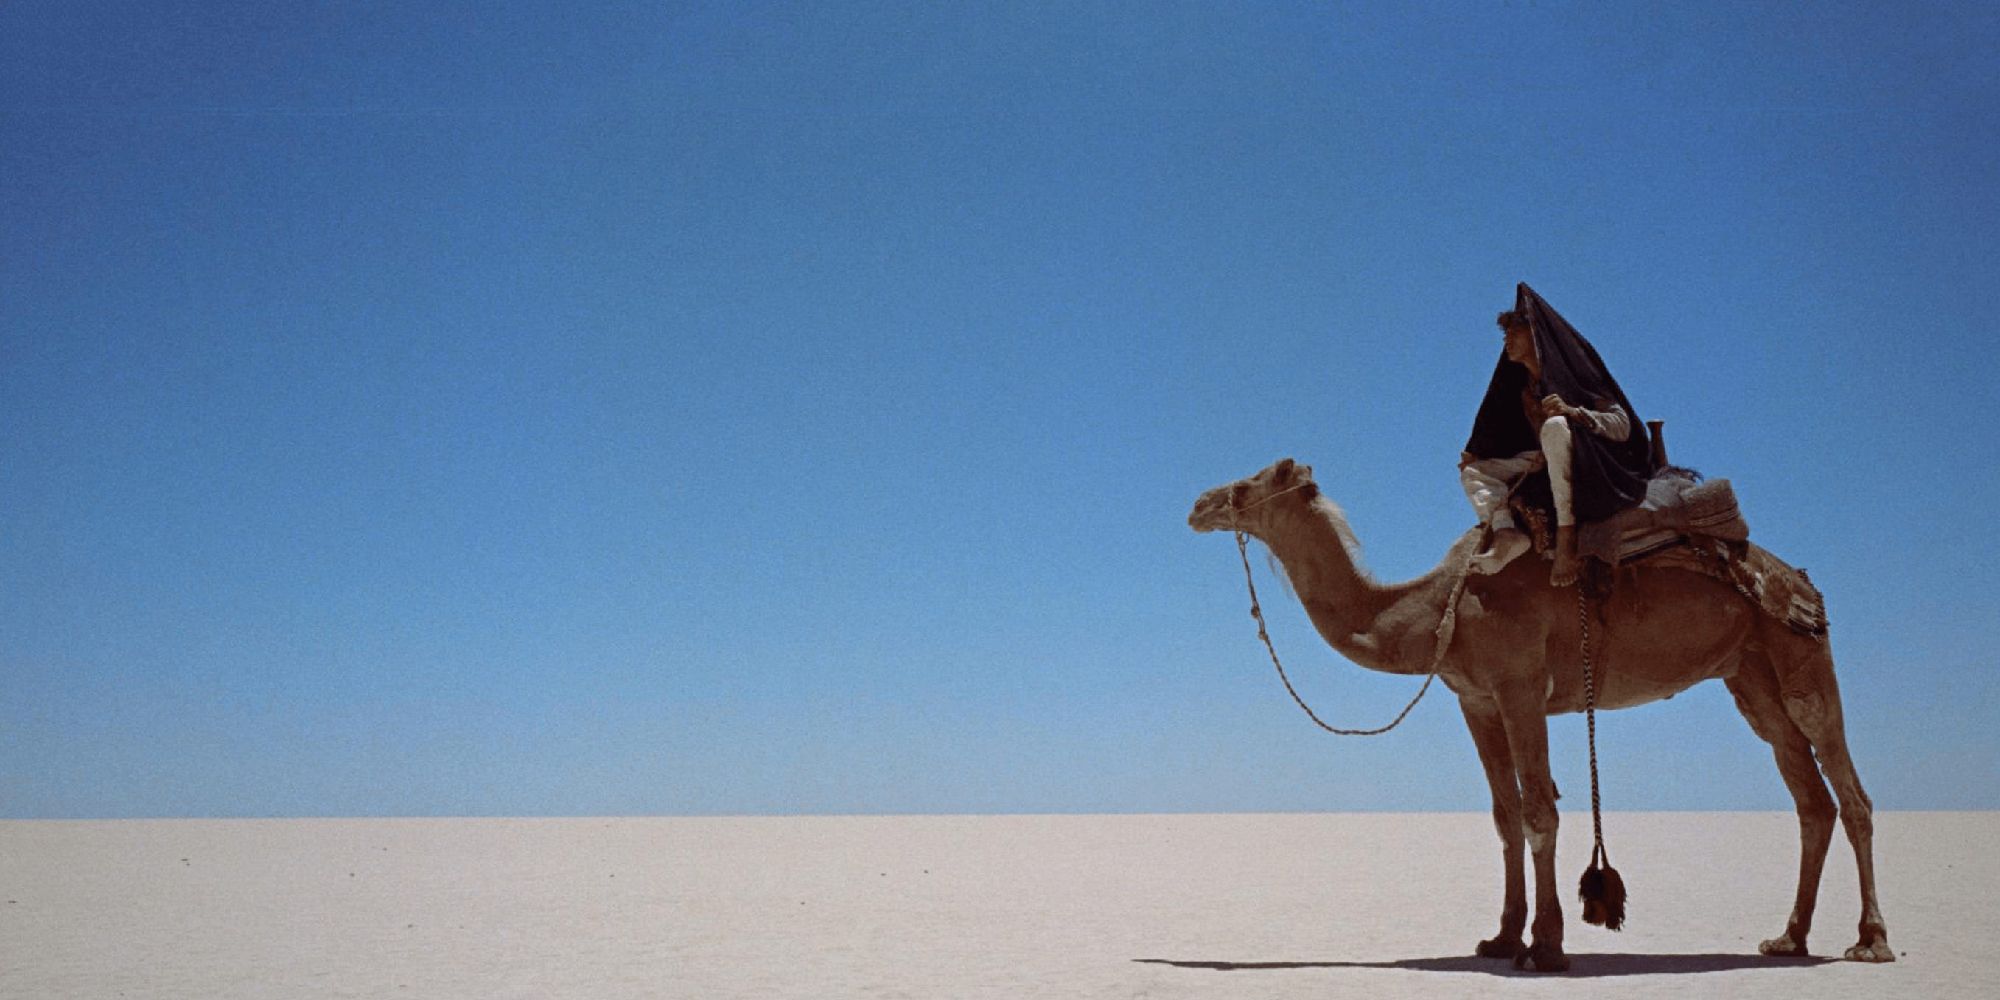 A man riding a camel in Lawrence of Arabia.